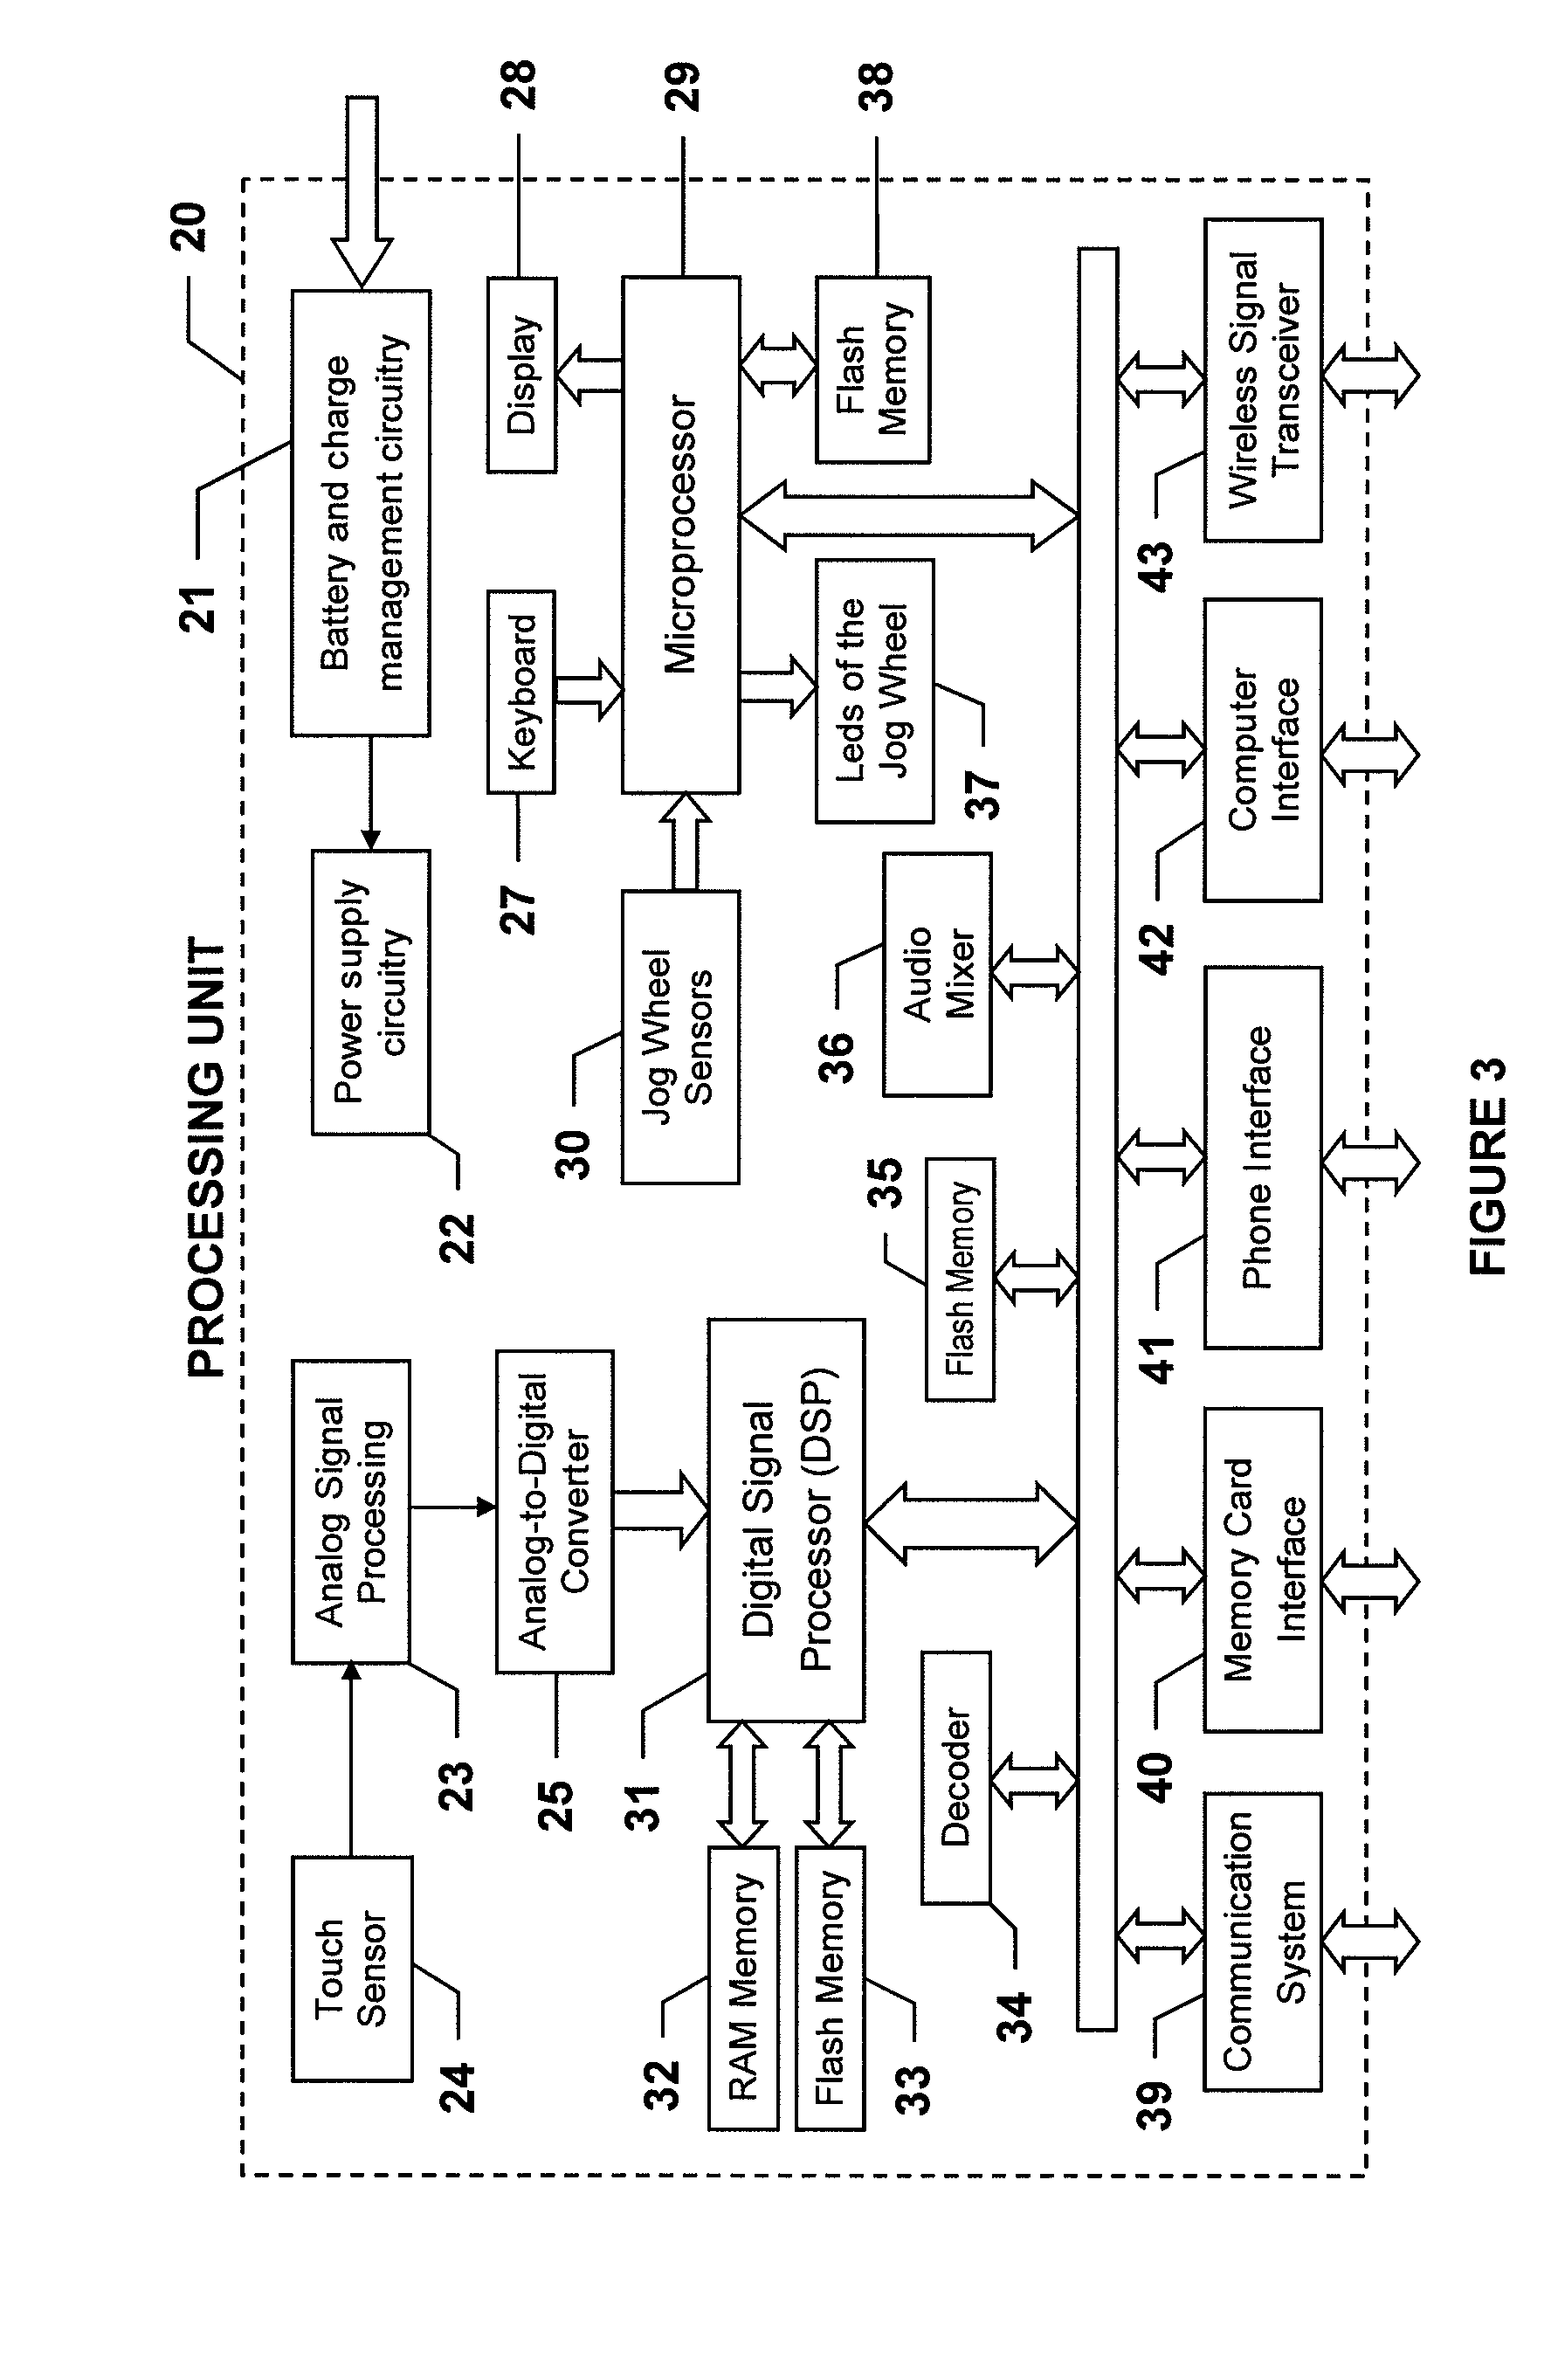 Electronic device for the production, playing, accompaniment and evaluation of sounds